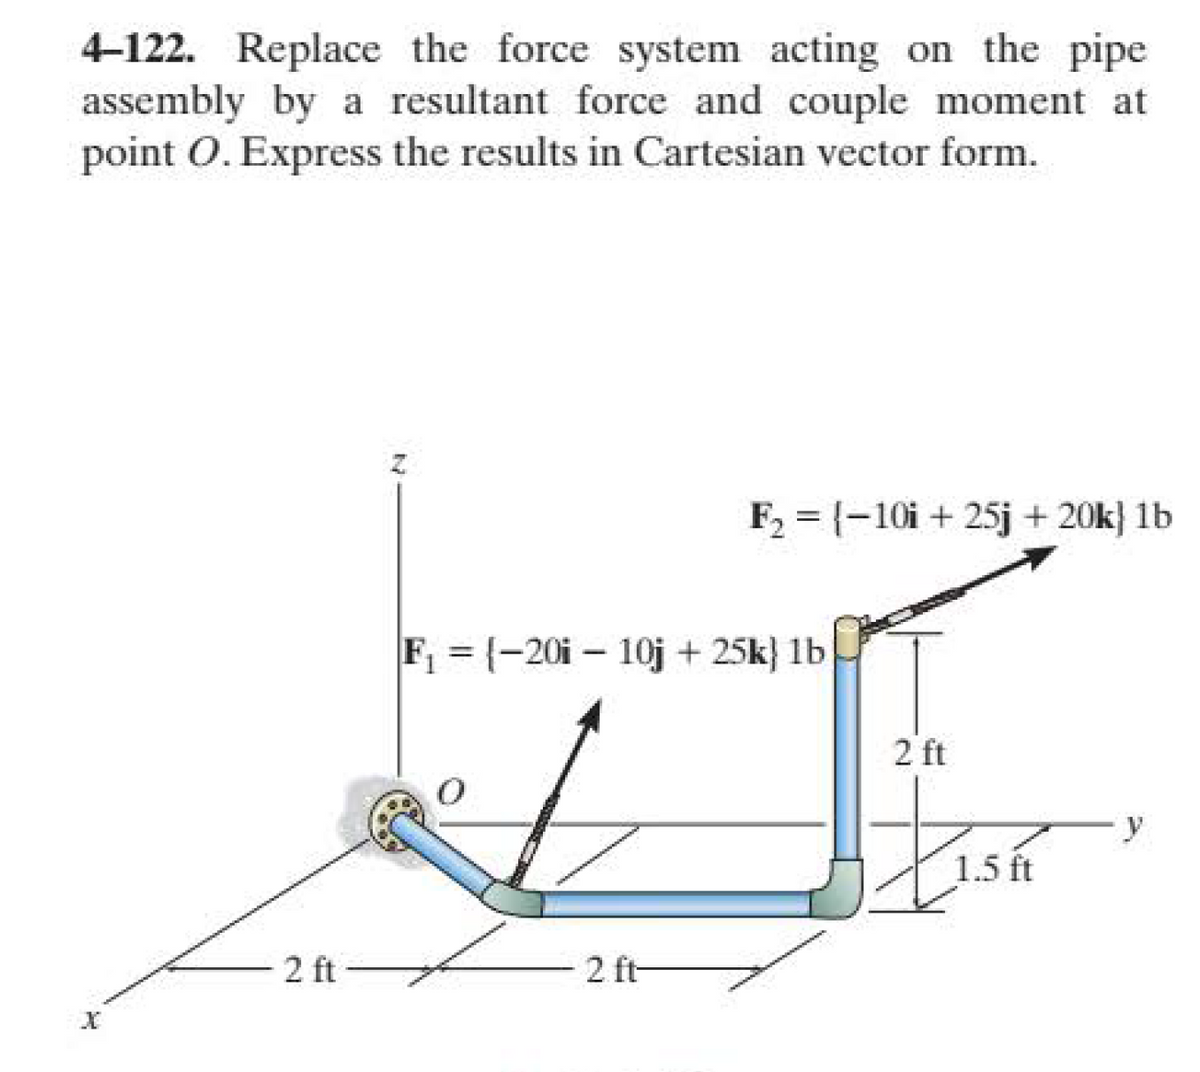 4-122. Replace the force system acting on the pipe.
assembly by a resultant force and couple moment at
point O. Express the results in Cartesian vector form.
=
F2 (-10i+25j+20k] 1b
F₁ = {-201-10j + 25k) 1b
2 ft
2 ft
2 ft-
1.5 ft